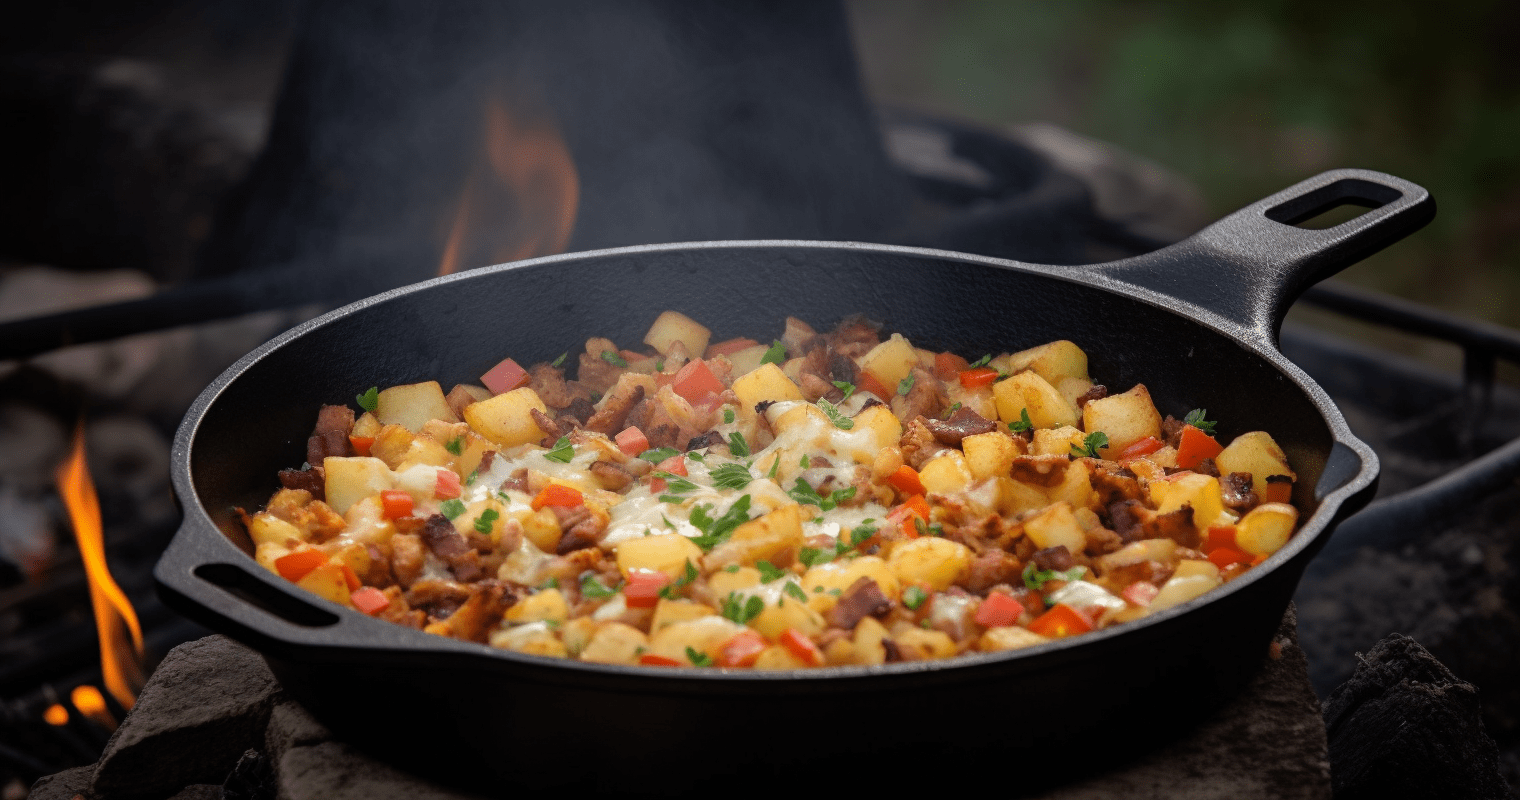 Campfire Breakfast Hash Cooking Instructions